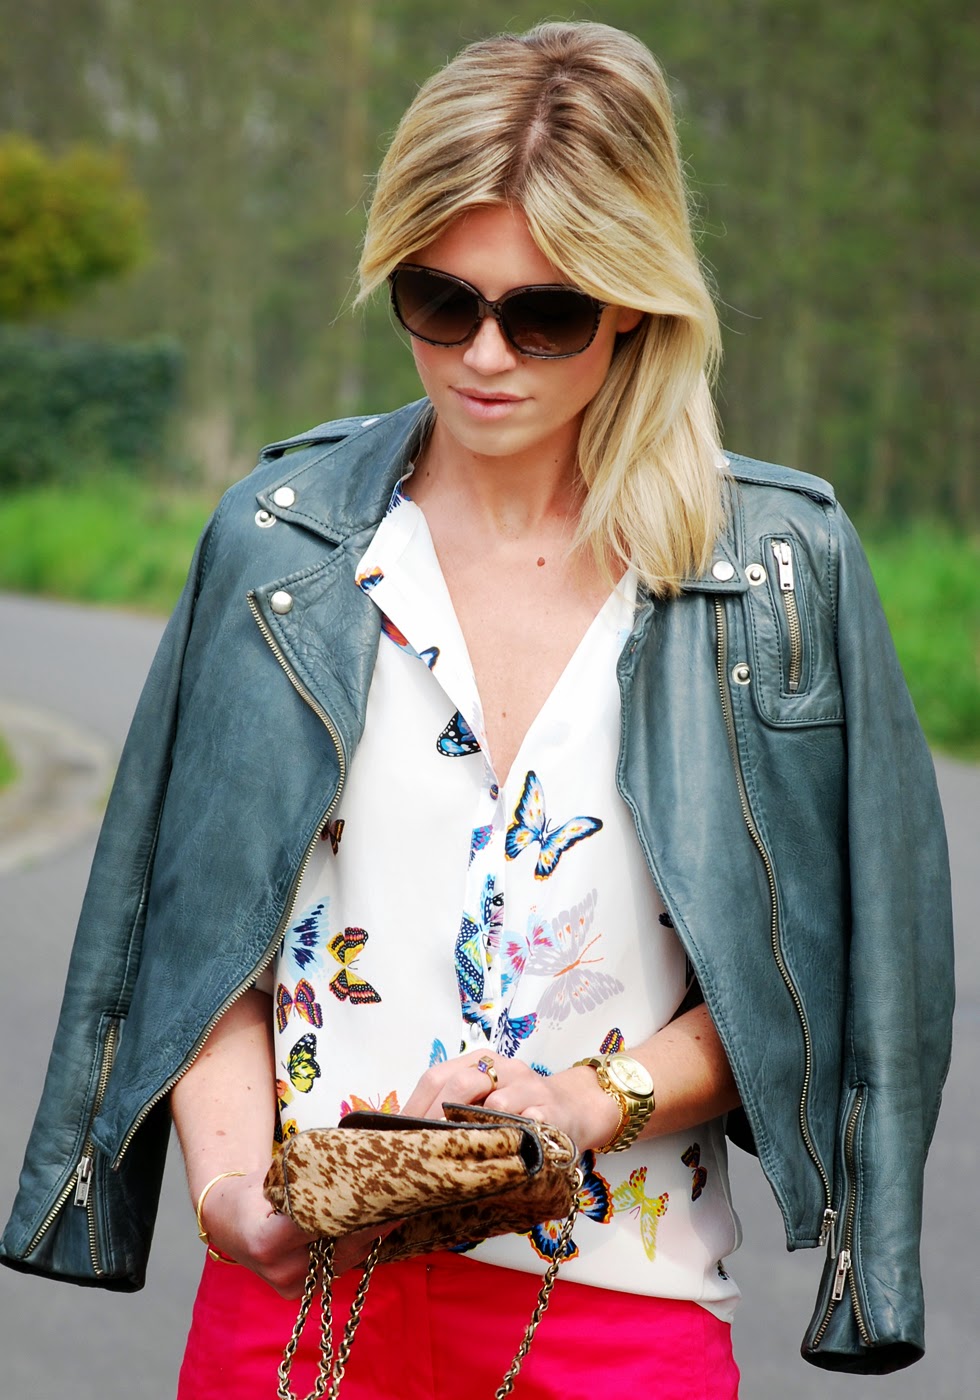 Mirror of Fashion: OUTFIT OF THE DAY // BUTTERFLY BLOUSE